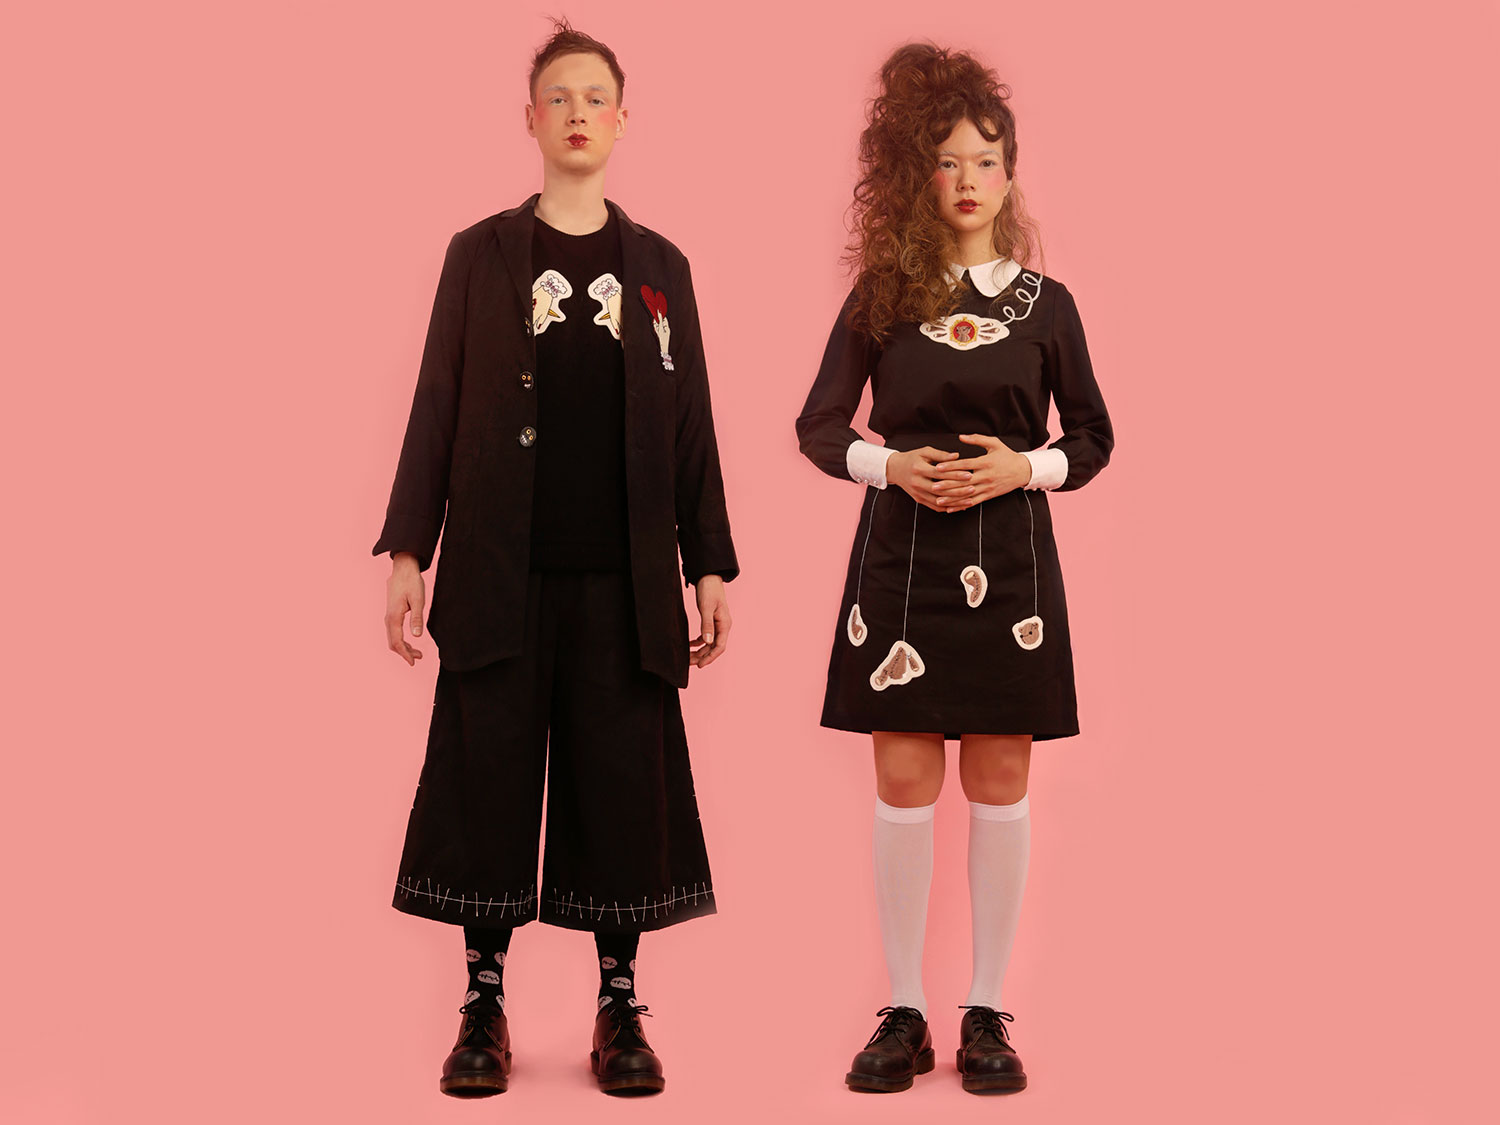 HEIHEI “I Am Not A Doll” 2015-16 A/W Collection Video